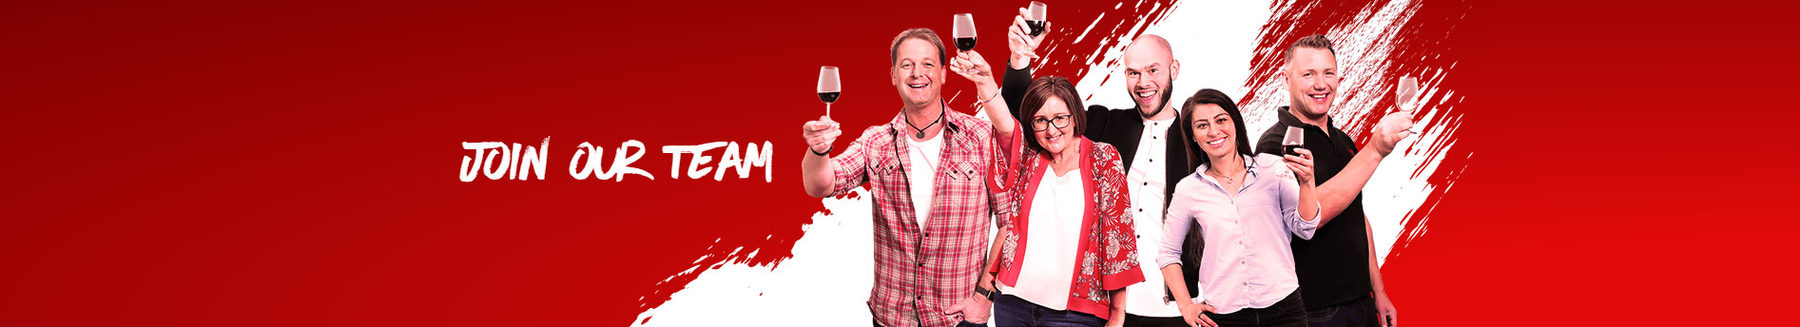 Company Image (Virgin Wines: Join Our Team)